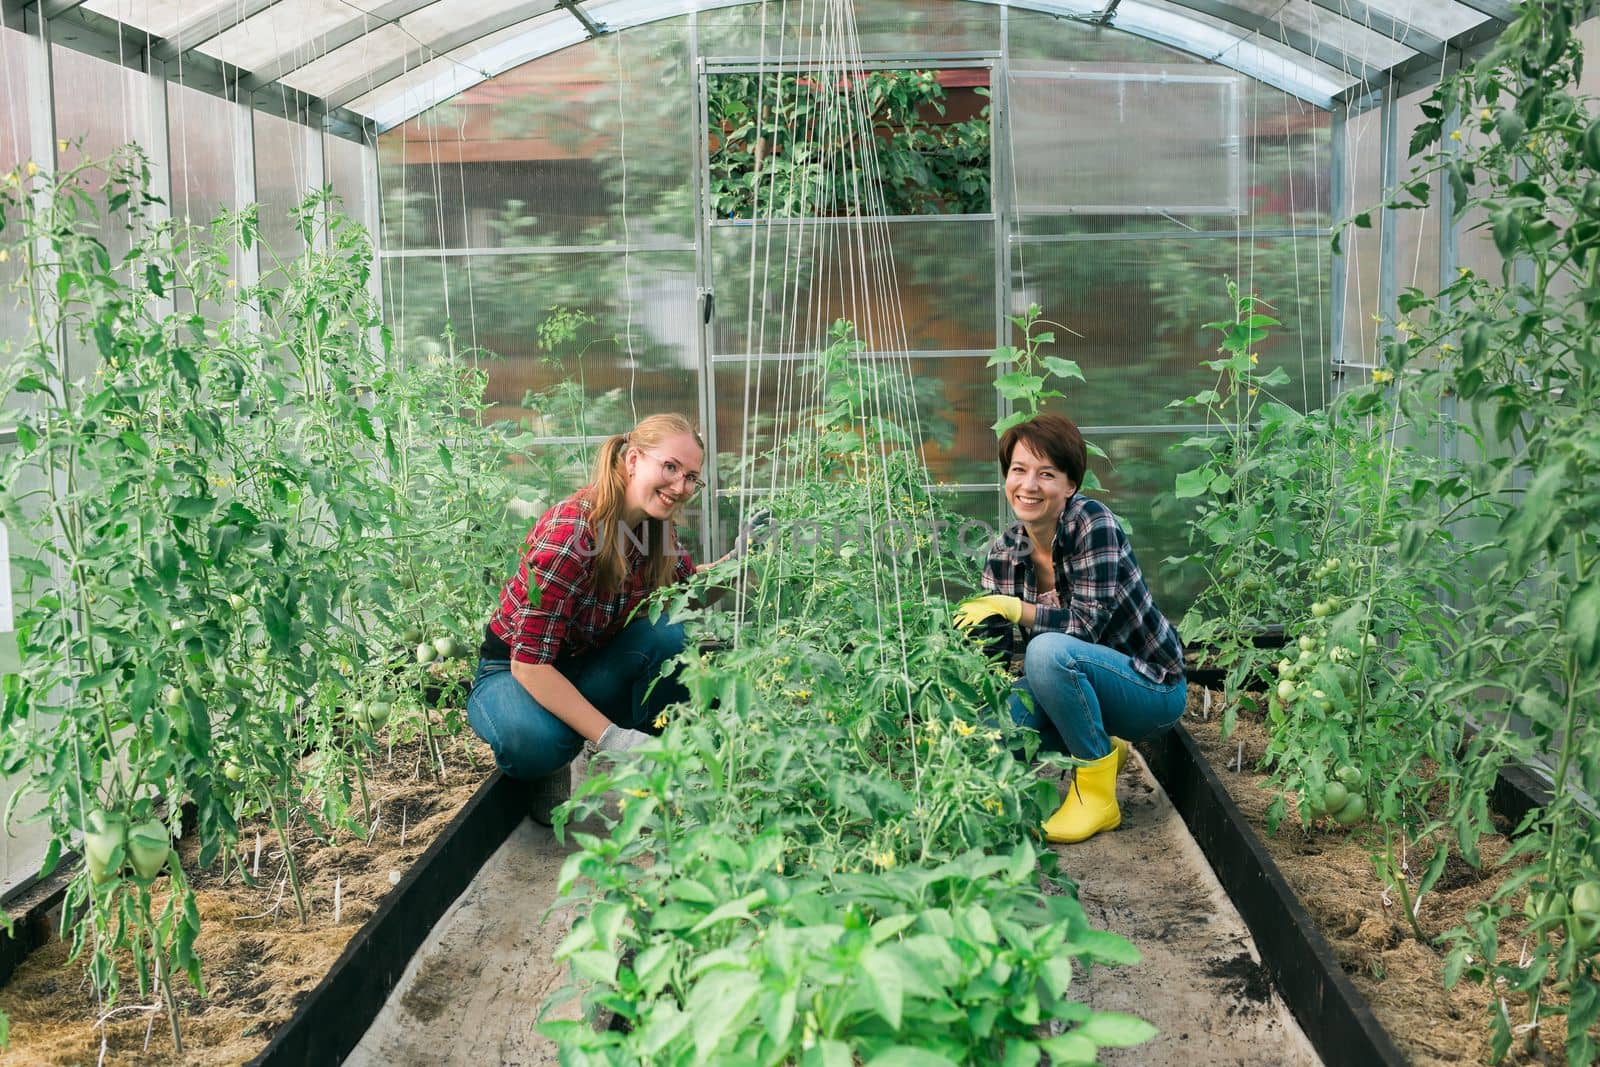 Two women working inside greenhouse garden - Nursery and spring concept by Satura86